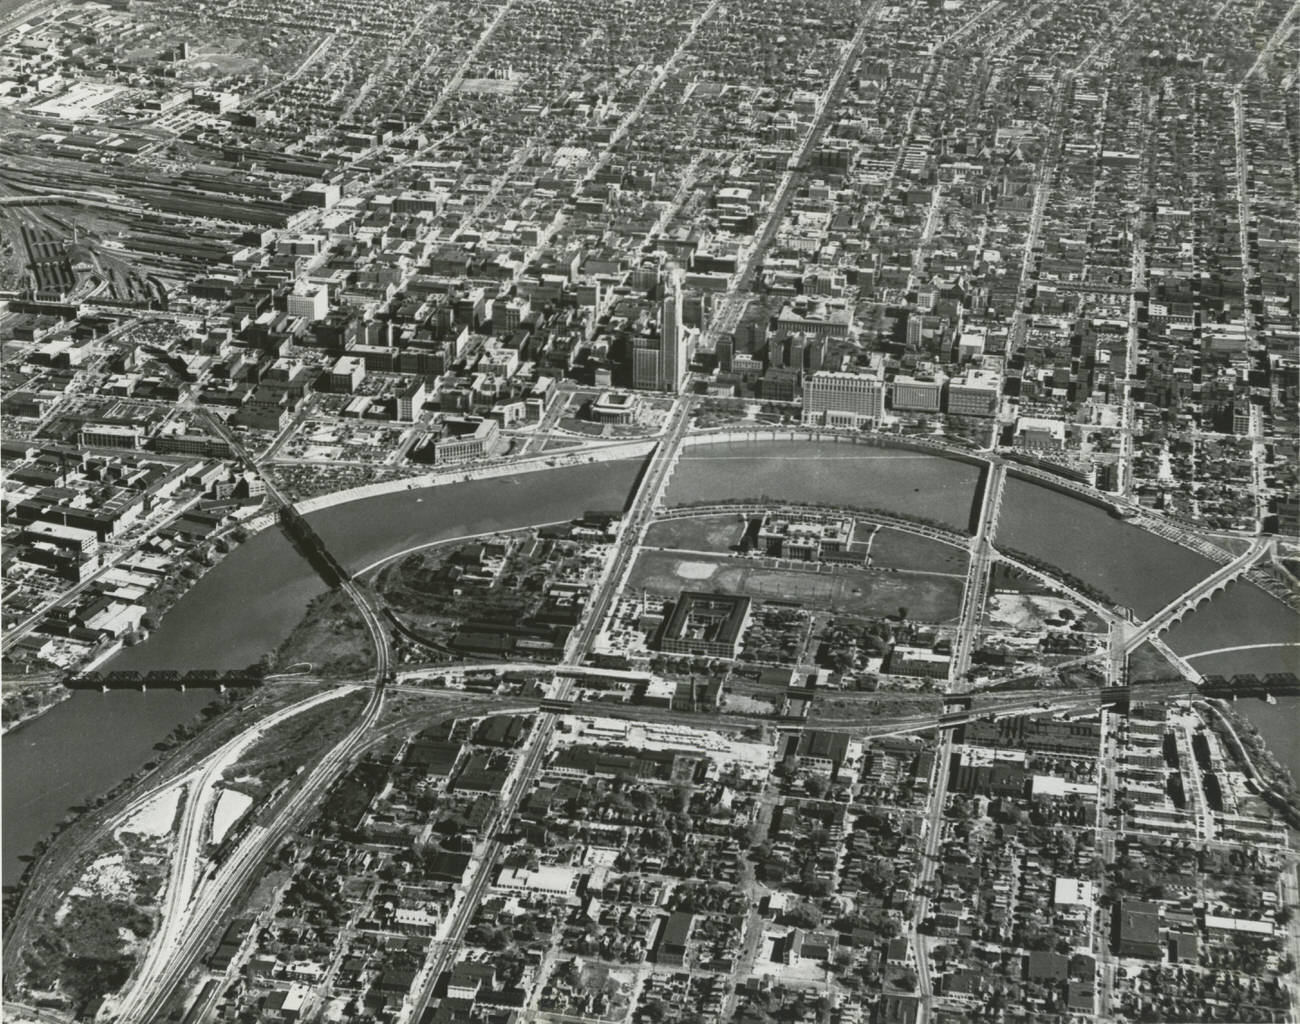 Aerial view of Columbus, looking east across Franklinton, the Scioto River, and downtown, circa 1950.